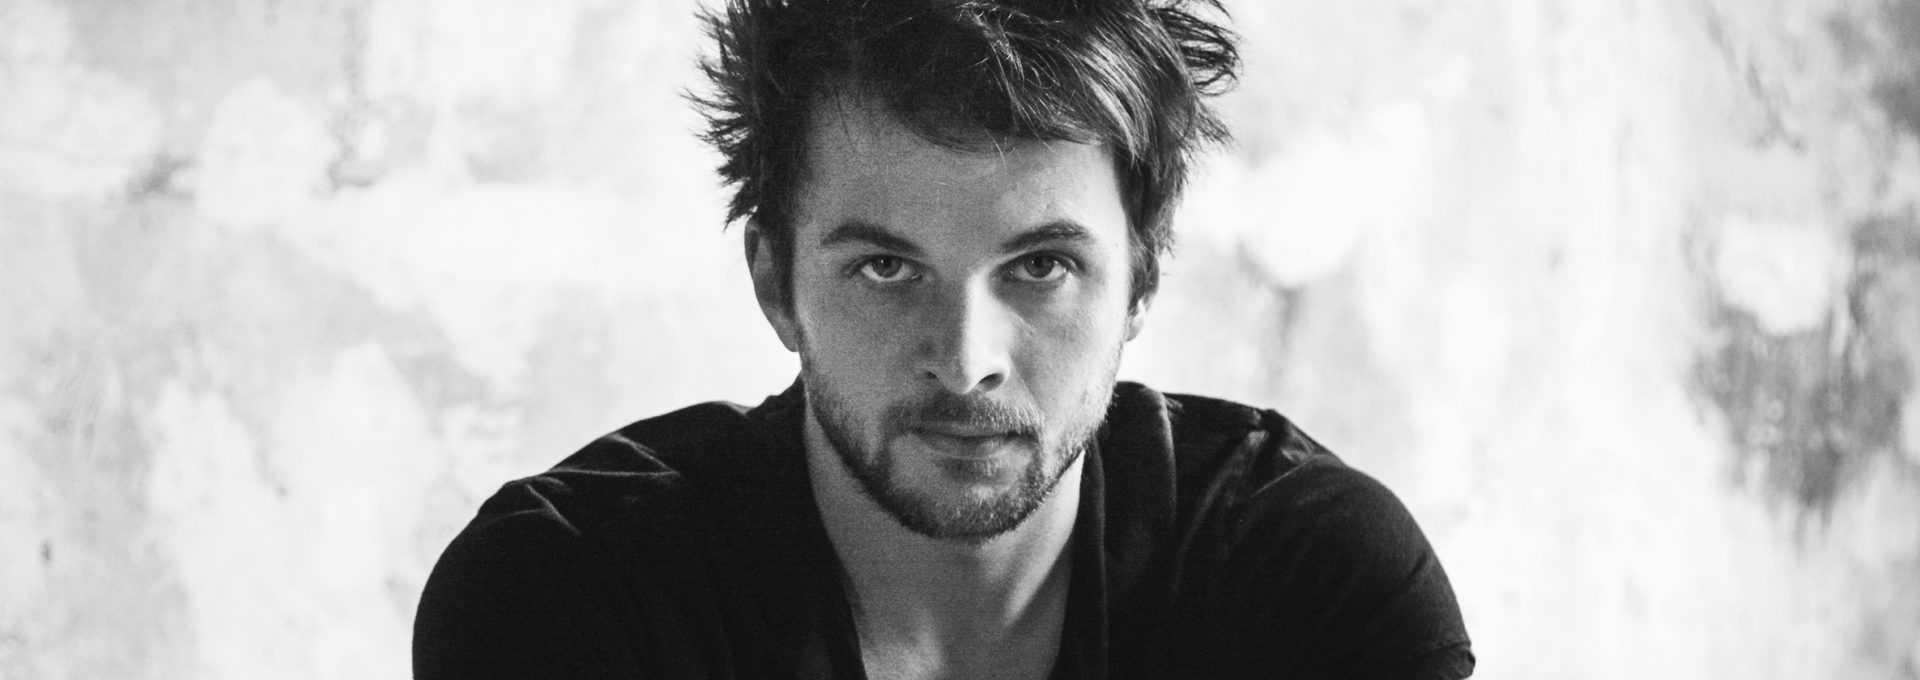 Interview with Nils Frahm for Spectrum Culture